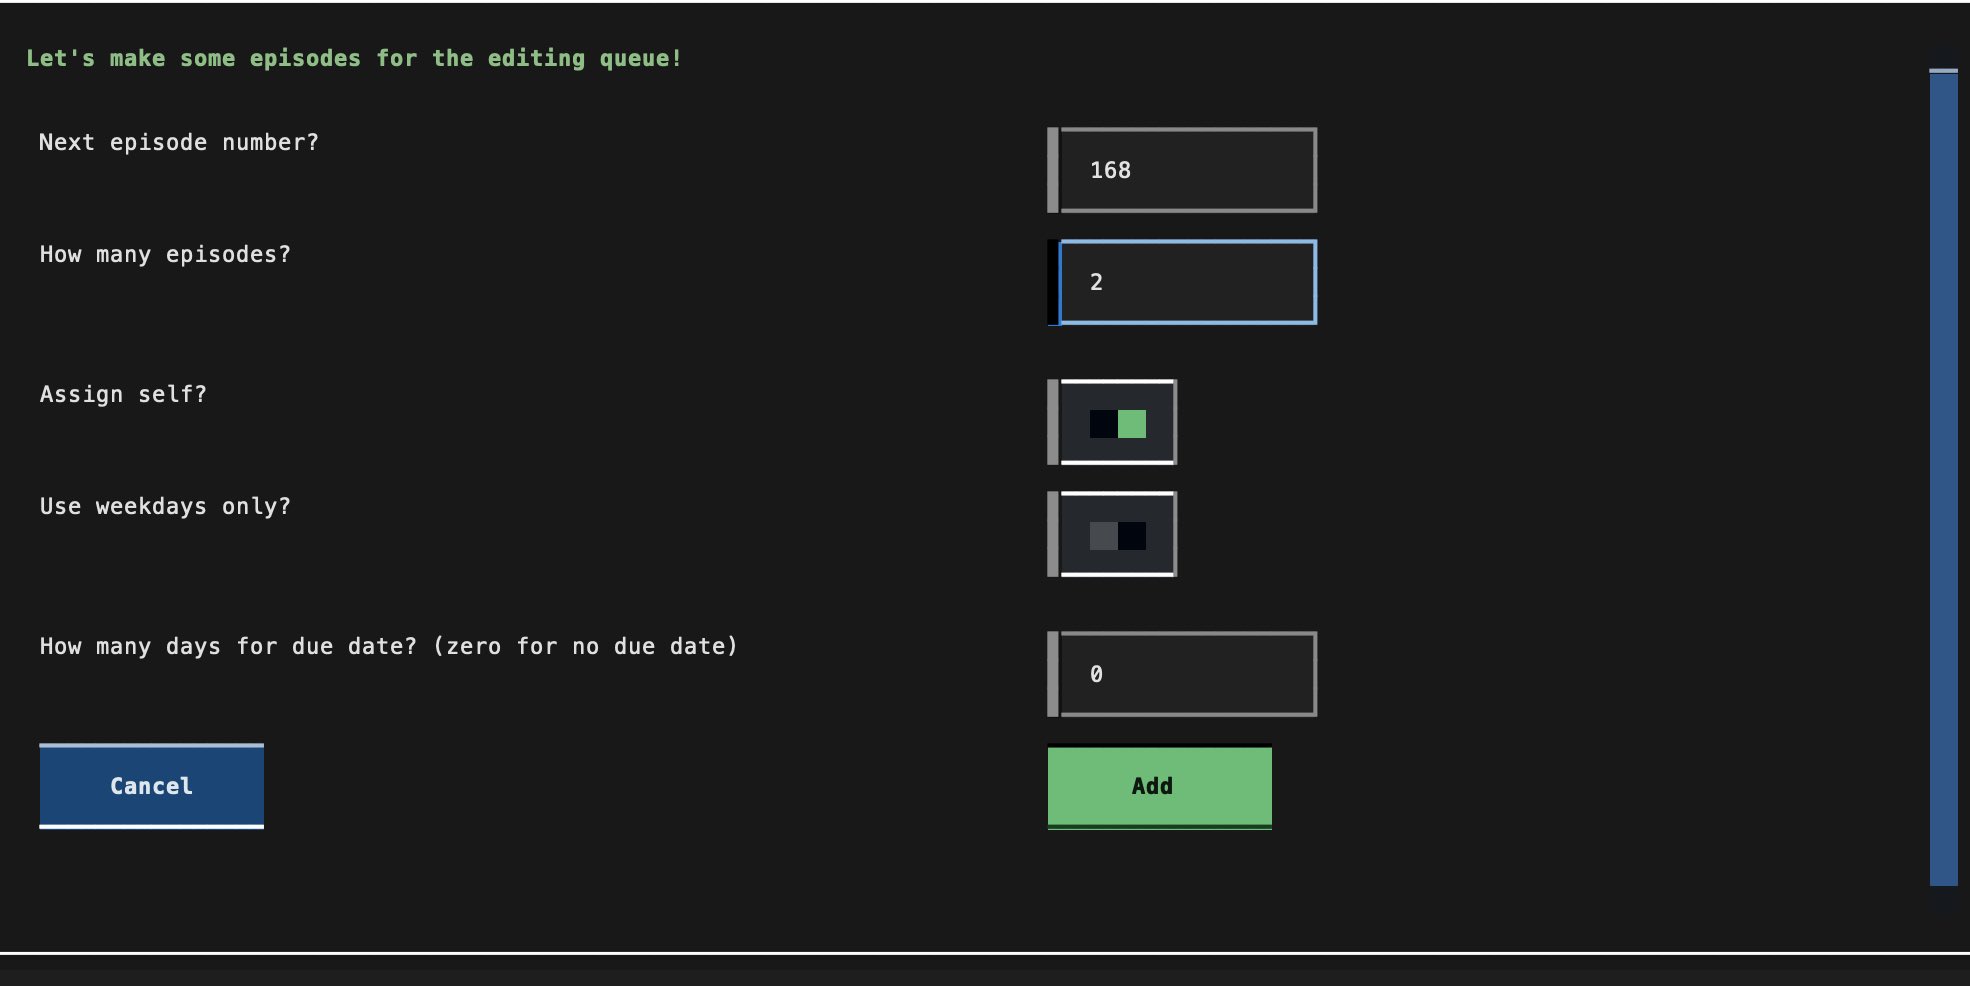 Screenshot of text display showing an add episode screen in a terminal.